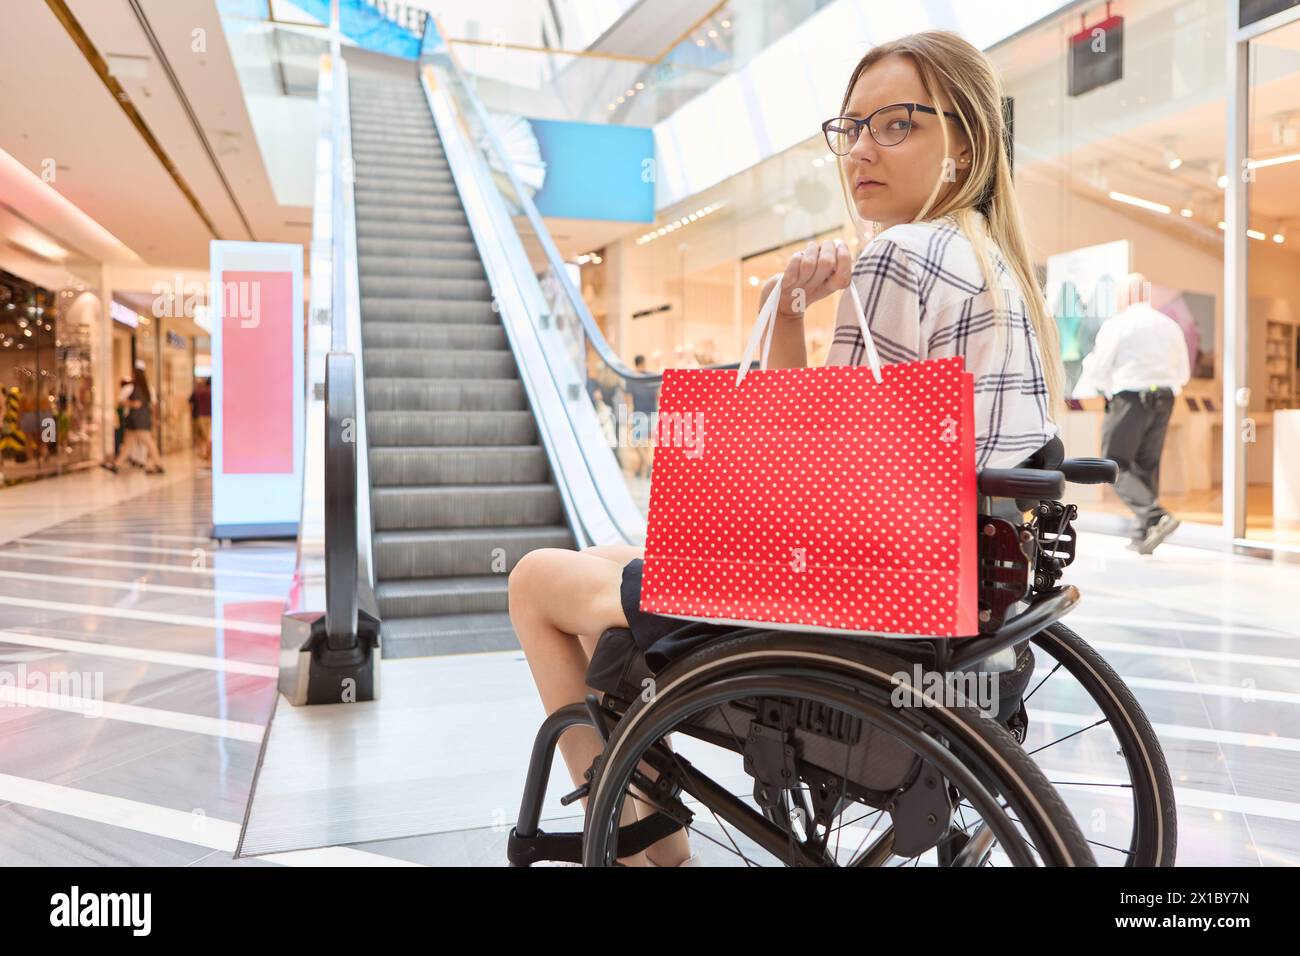 A person who uses a wheelchair holding a shopping bag while navigating the mall illustrates accessibility and independence. Stock Photo